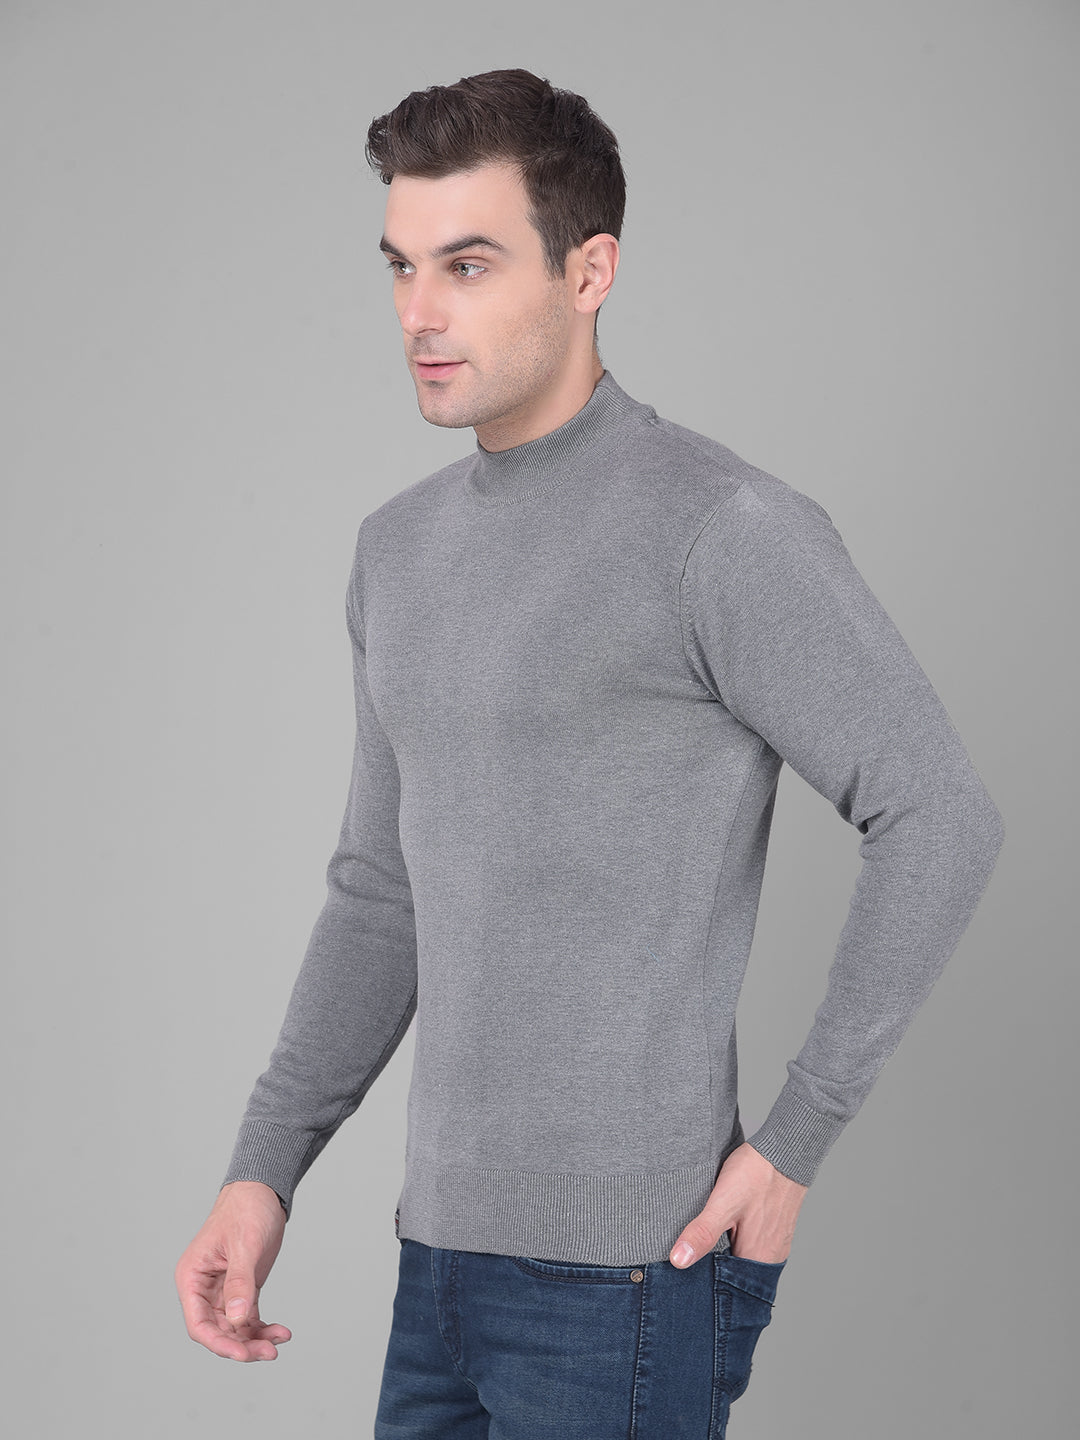 cobb solid grey high neck sweater